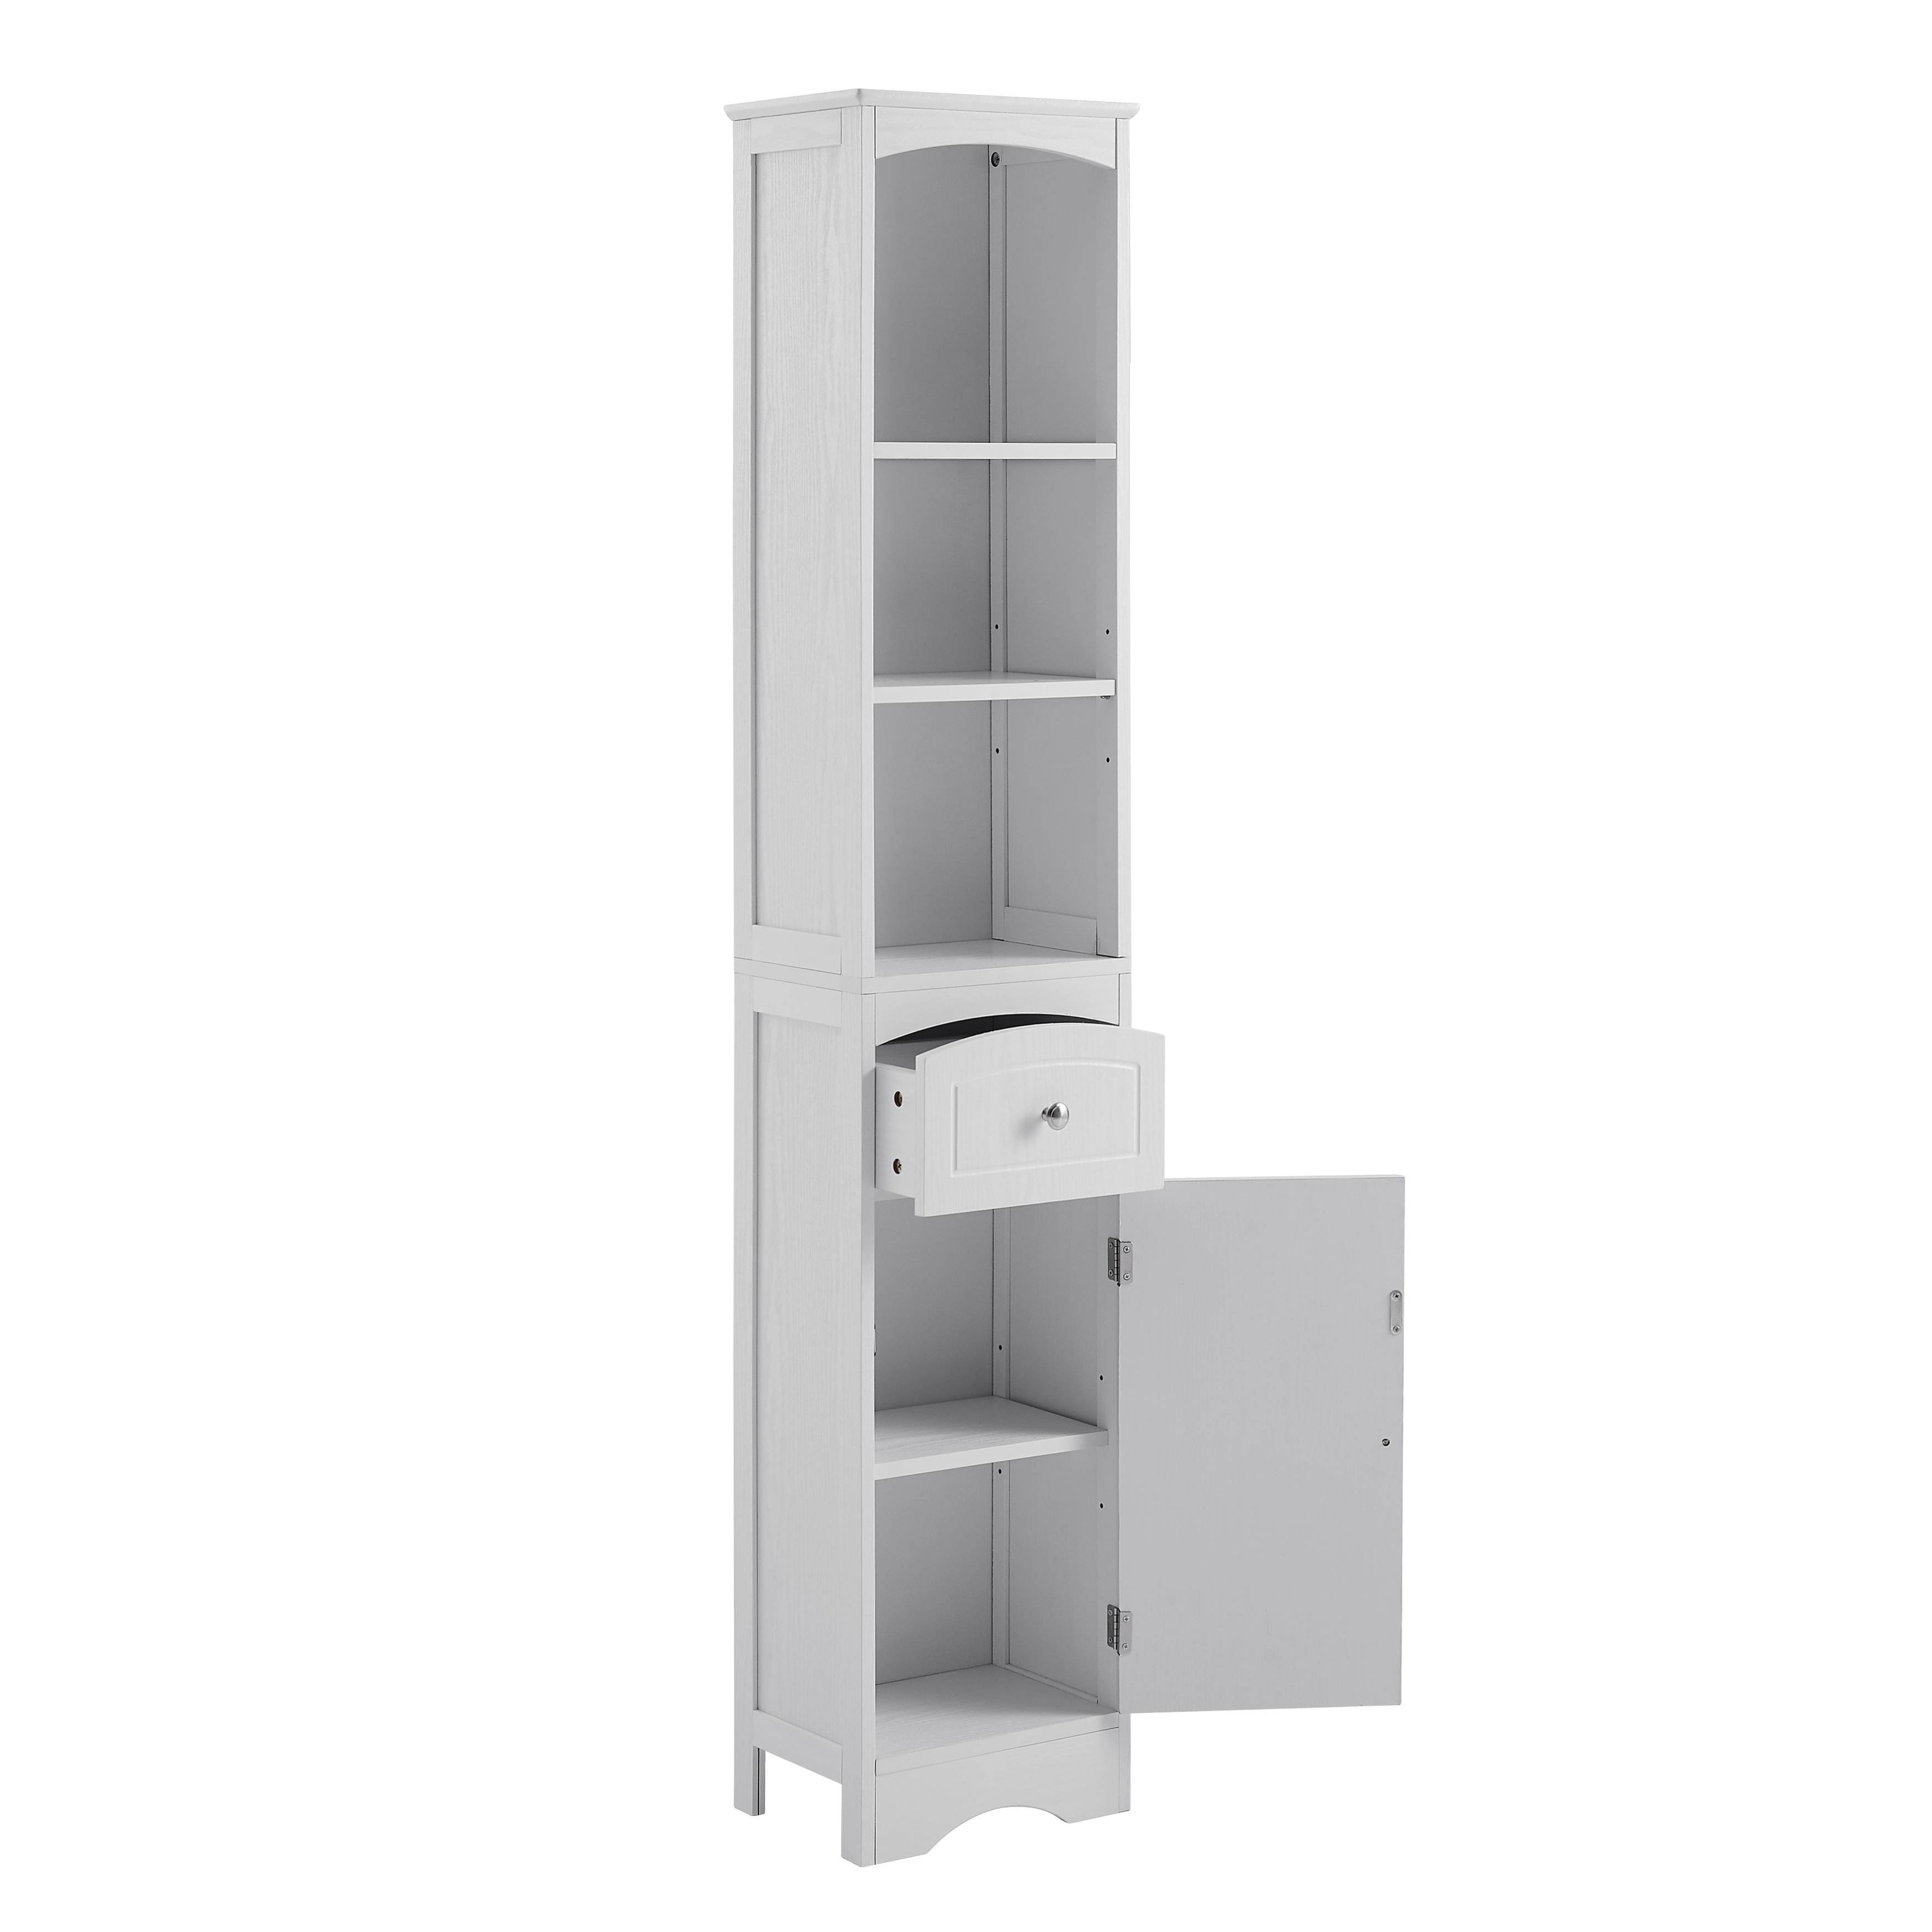 https://ak1.ostkcdn.com/images/products/is/images/direct/a998e2d93771d4fd667868ca5b63eb251df1f03b/Nestfair-Freestanding-Bathroom-Cabinet-with-Drawer-and-Adjustable-Shelf.jpg